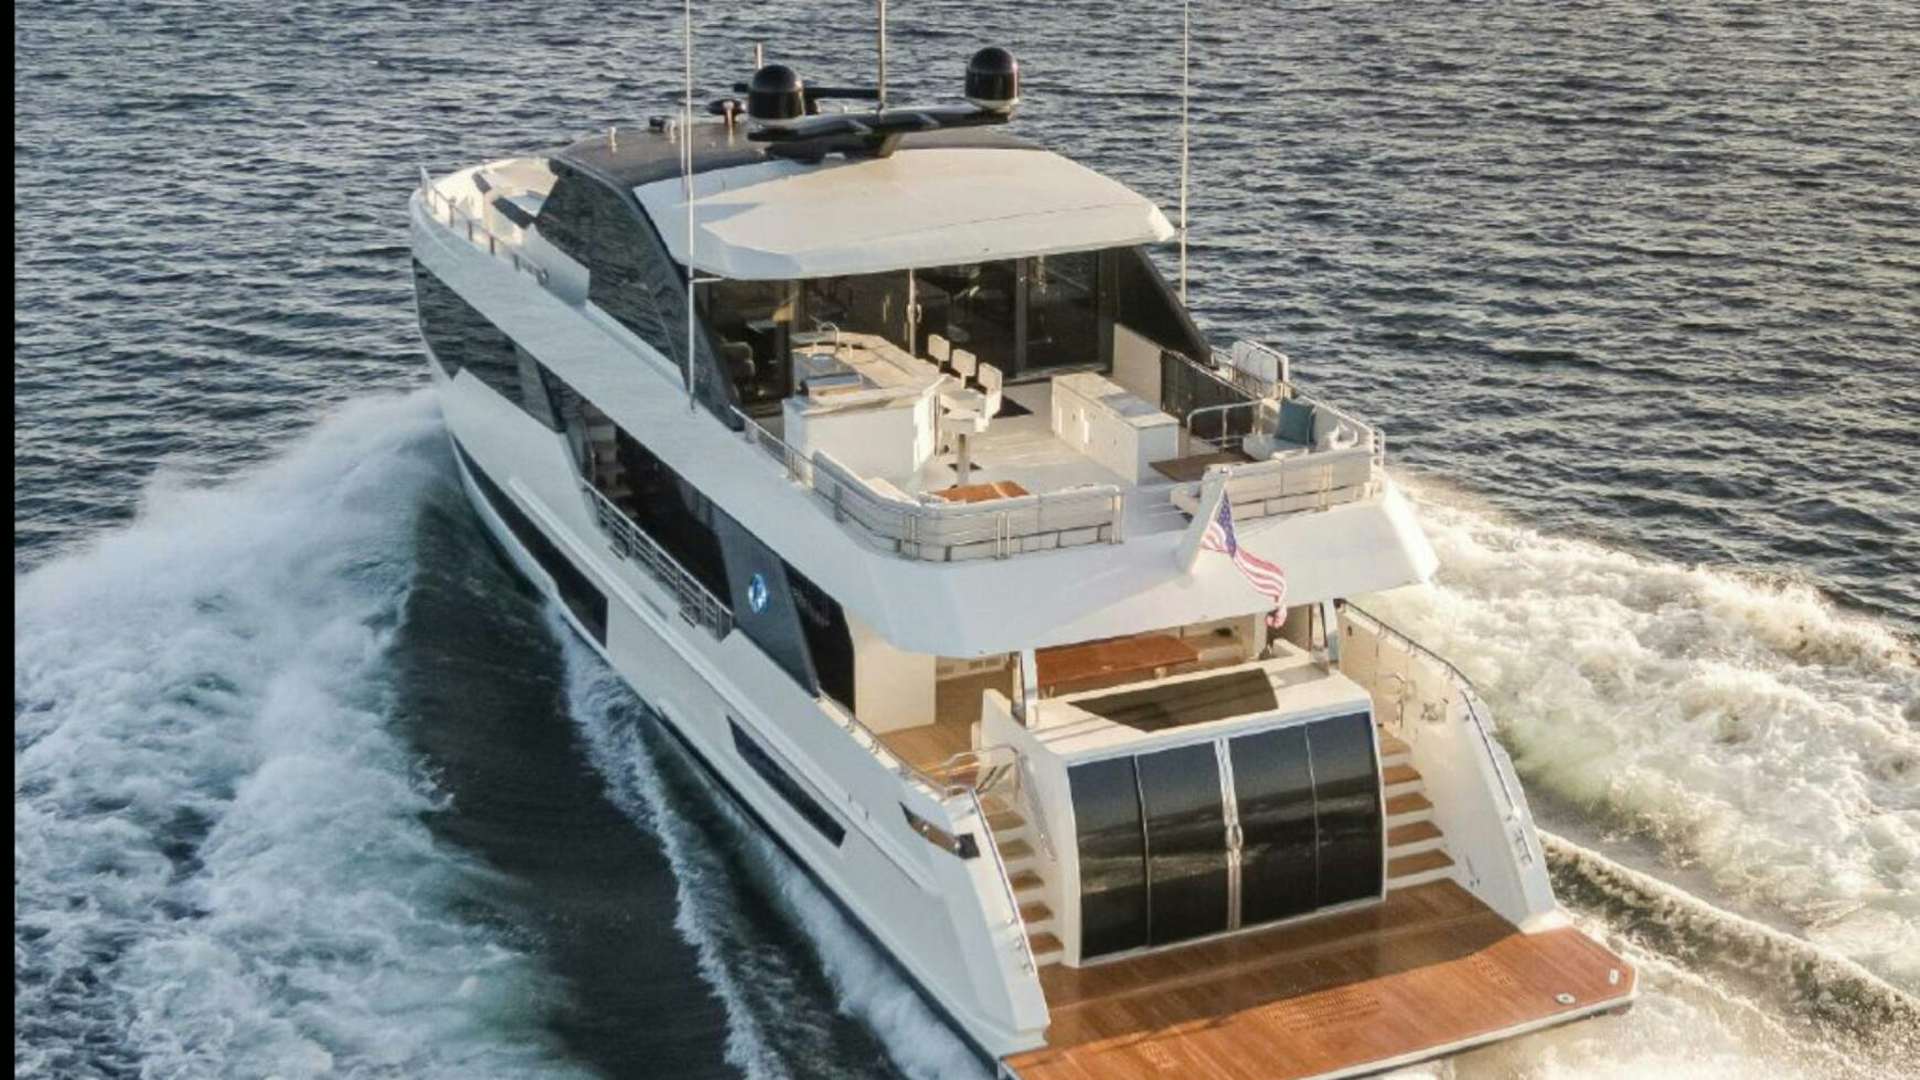 Tlc
Yacht for Sale